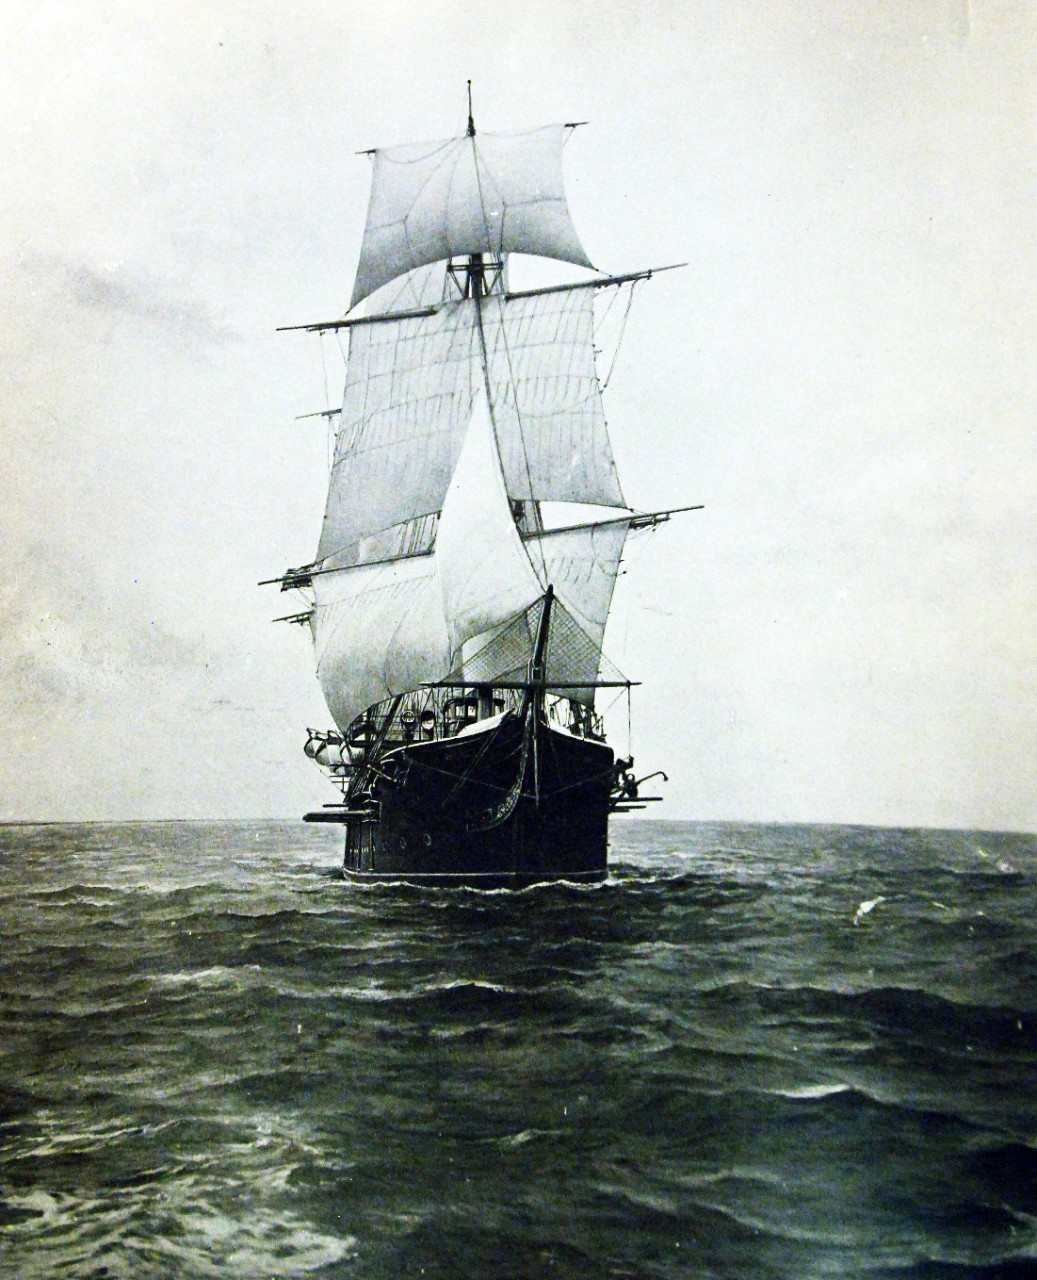 LC-Lot 3000-V-2:   USS Hartford (1859-1926), sloop-of-war, 1891-1912.  Bow view while under sail.  Hartford is notable for being Admiral David G. Farragut’s flagship during the Battle of Mobile Bay in August 1864.    Detroit Photographic Company, circa 1891-1912.  Courtesy of the Library of Congress.  Photographed through Mylar sleeve.   (2016/03/10).